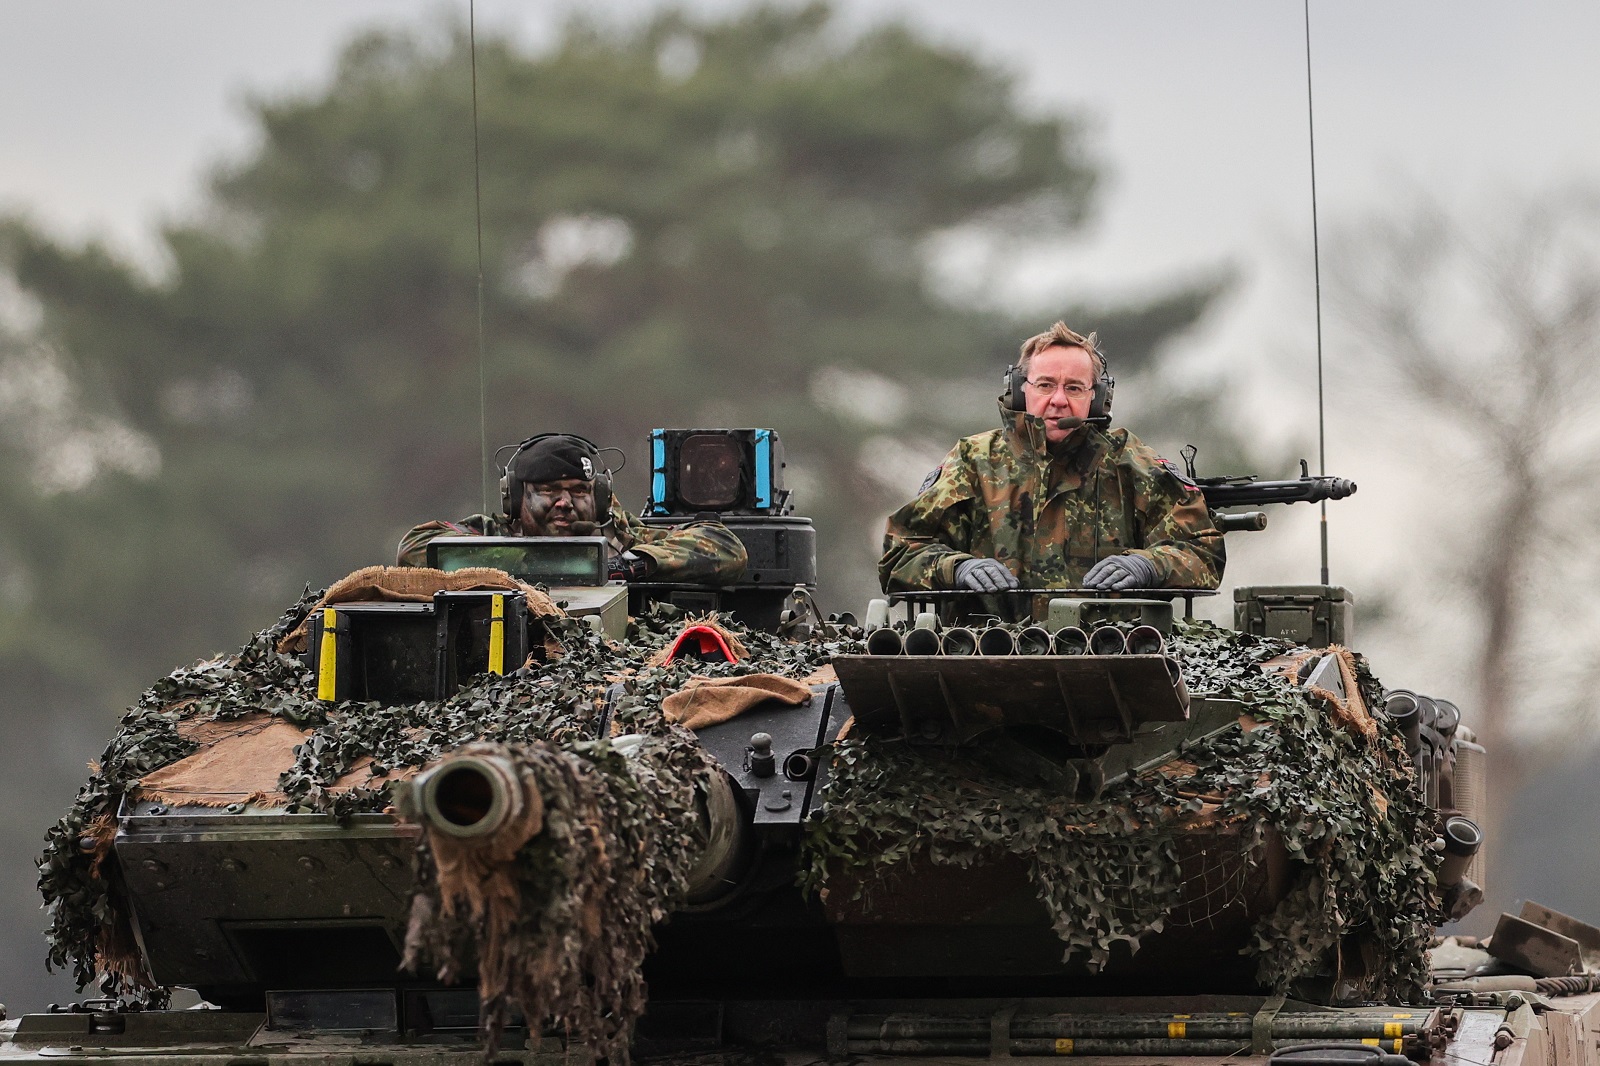 epa10442779 German Defense Minister Boris Pistorius (R) rides on the turret of a 'Leopard 2 A6' battle tank during his visit to German armed forces Bundeswehr soldiers of the tank battalion 203 in Augustdorf, Germany, 01 February 2023. According to the German government's decision to supply 14 Leopard 2 tanks to Ukraine, Pistorius got informed about the performance of the weapon system.  EPA/FRIEDEMANN VOGEL